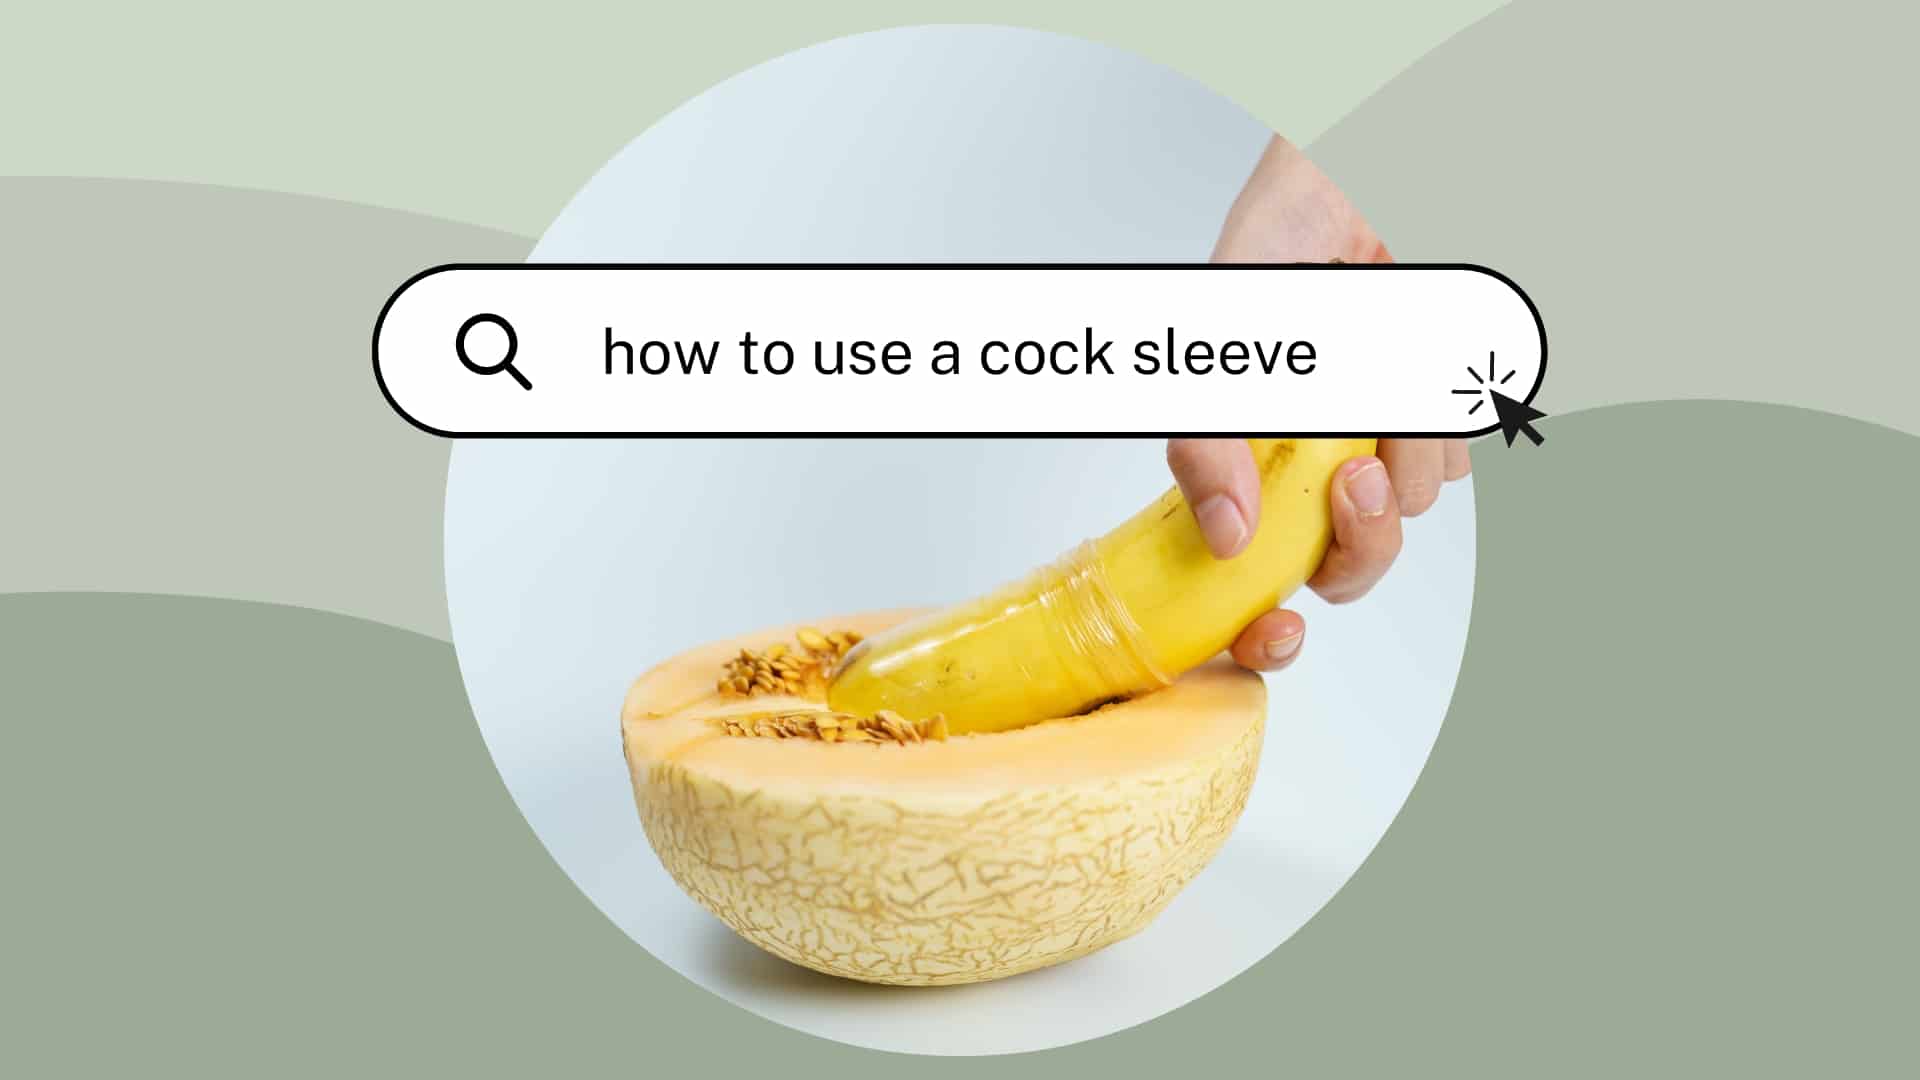 How to Use a Cock Sleeve